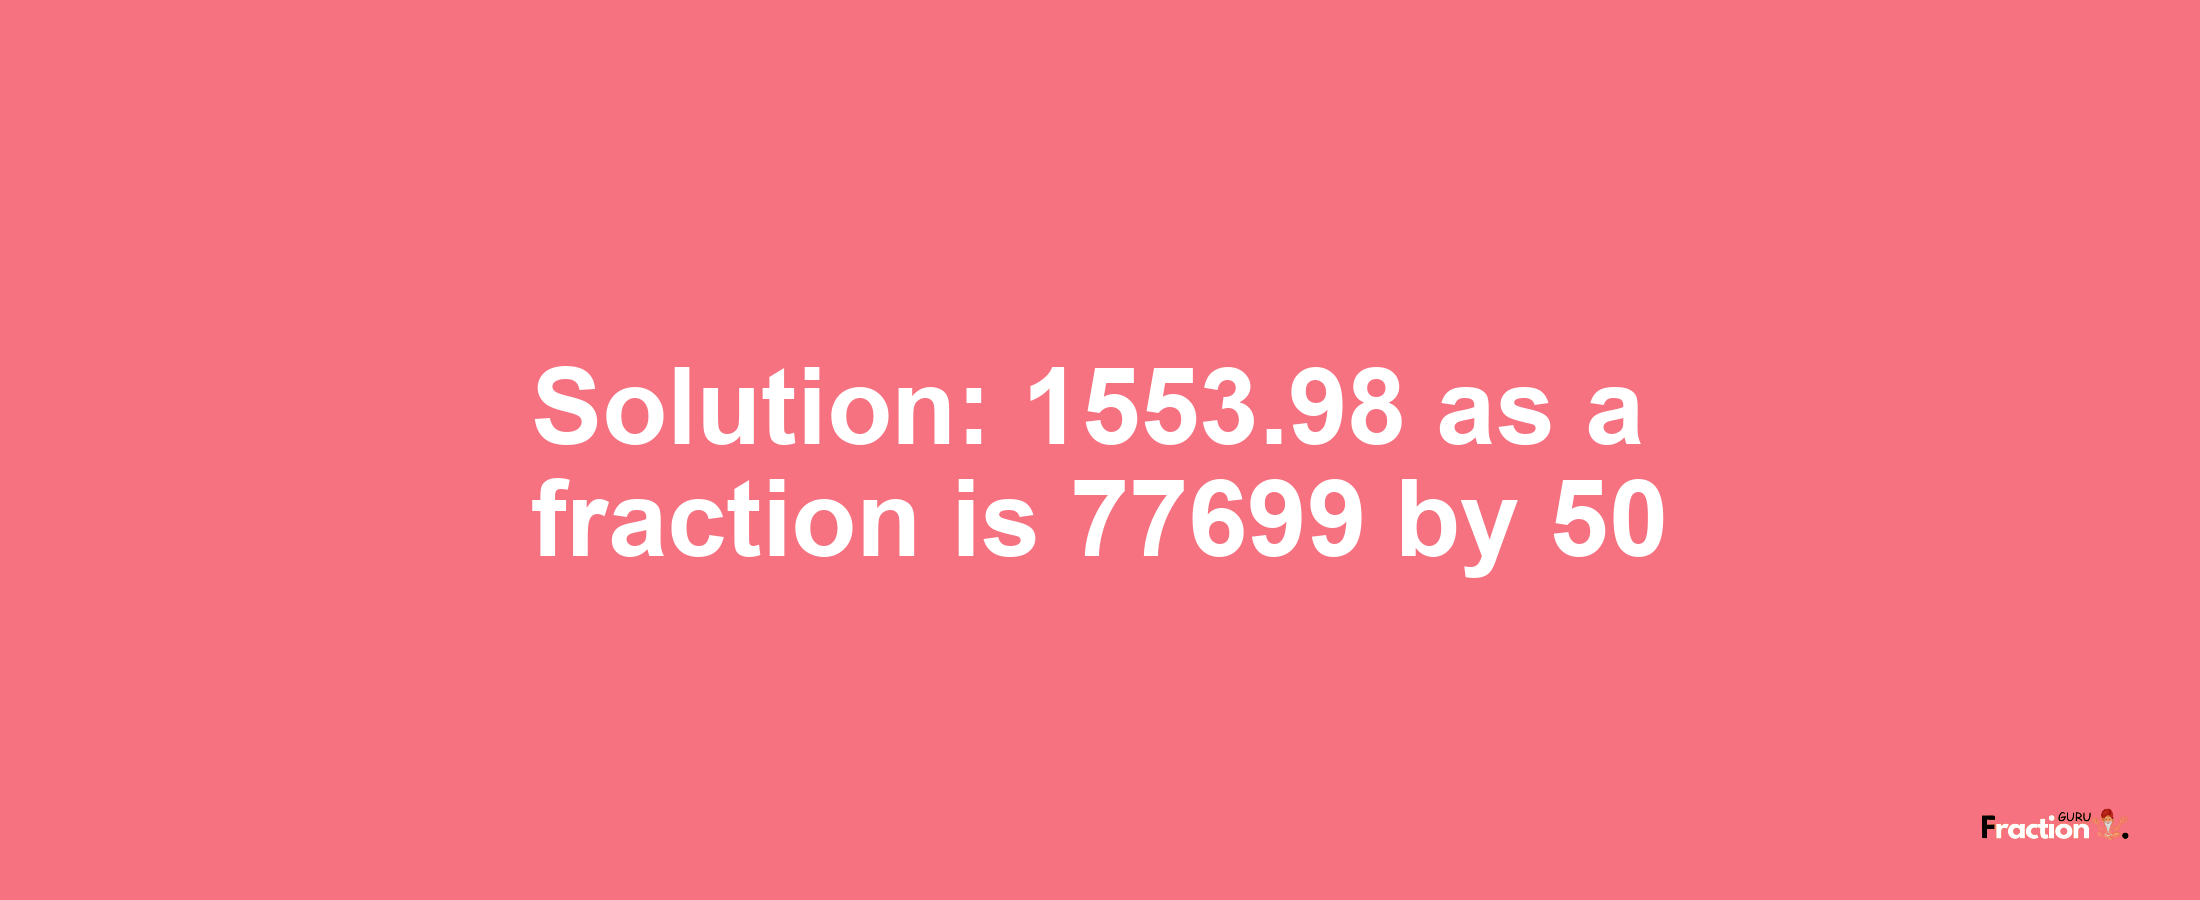 Solution:1553.98 as a fraction is 77699/50